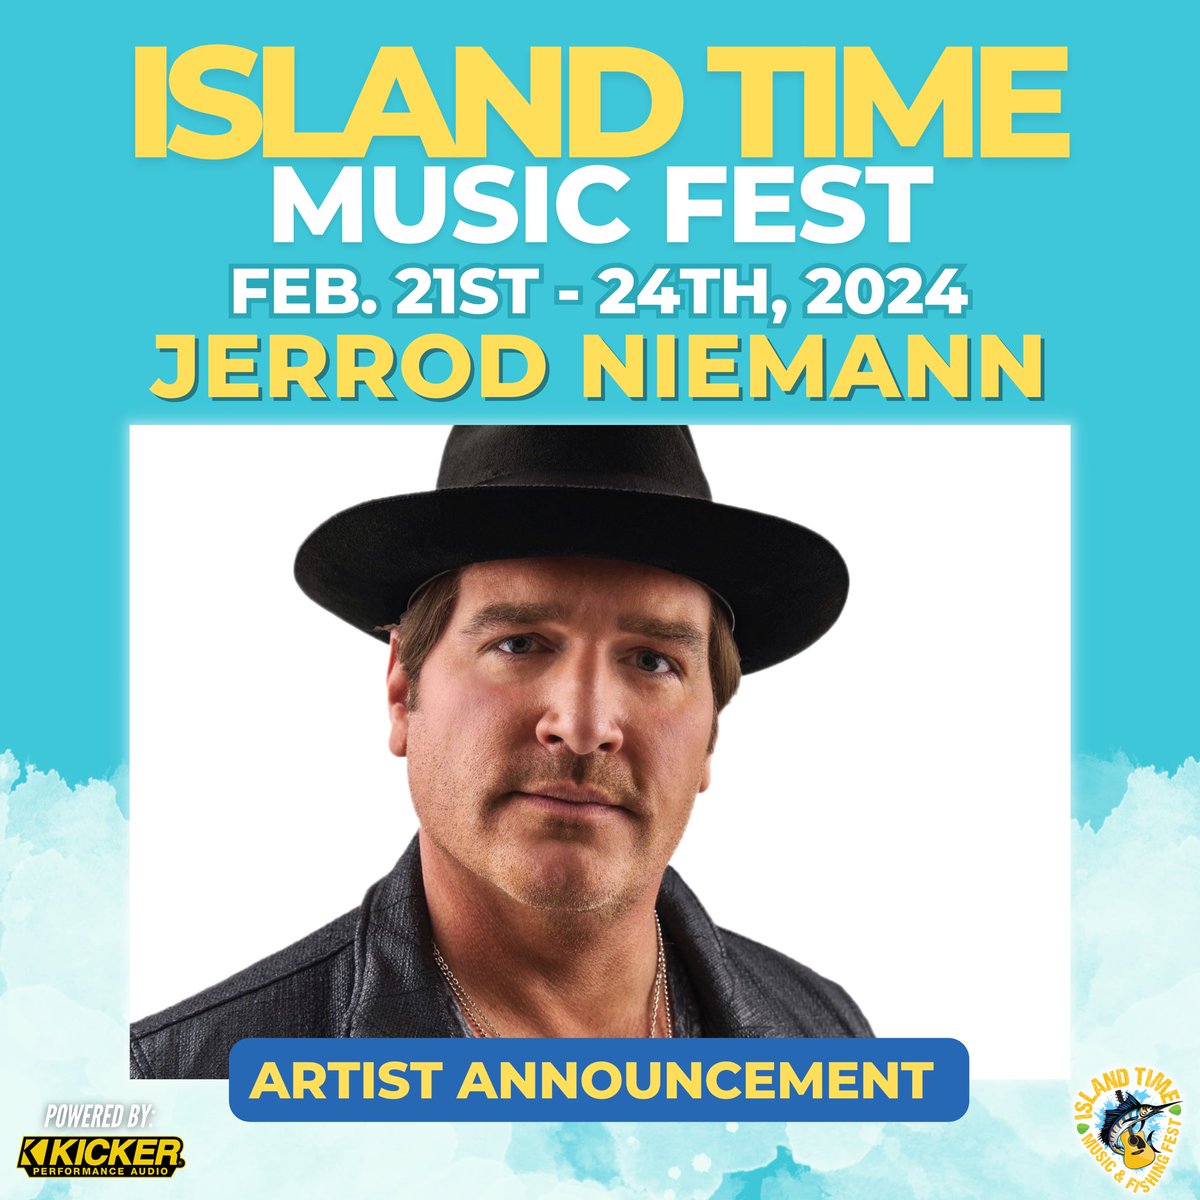 Guess what?! We are excited to announce our friend @jrodfromoz is coming back for ITMF 2024! Maybe we will get to hear Jerrod and @leahturnermusic’s duet “South Of The Border”? 👀💃🏼 ‌ Tickets on sale now at islandtimemusicfest.com!